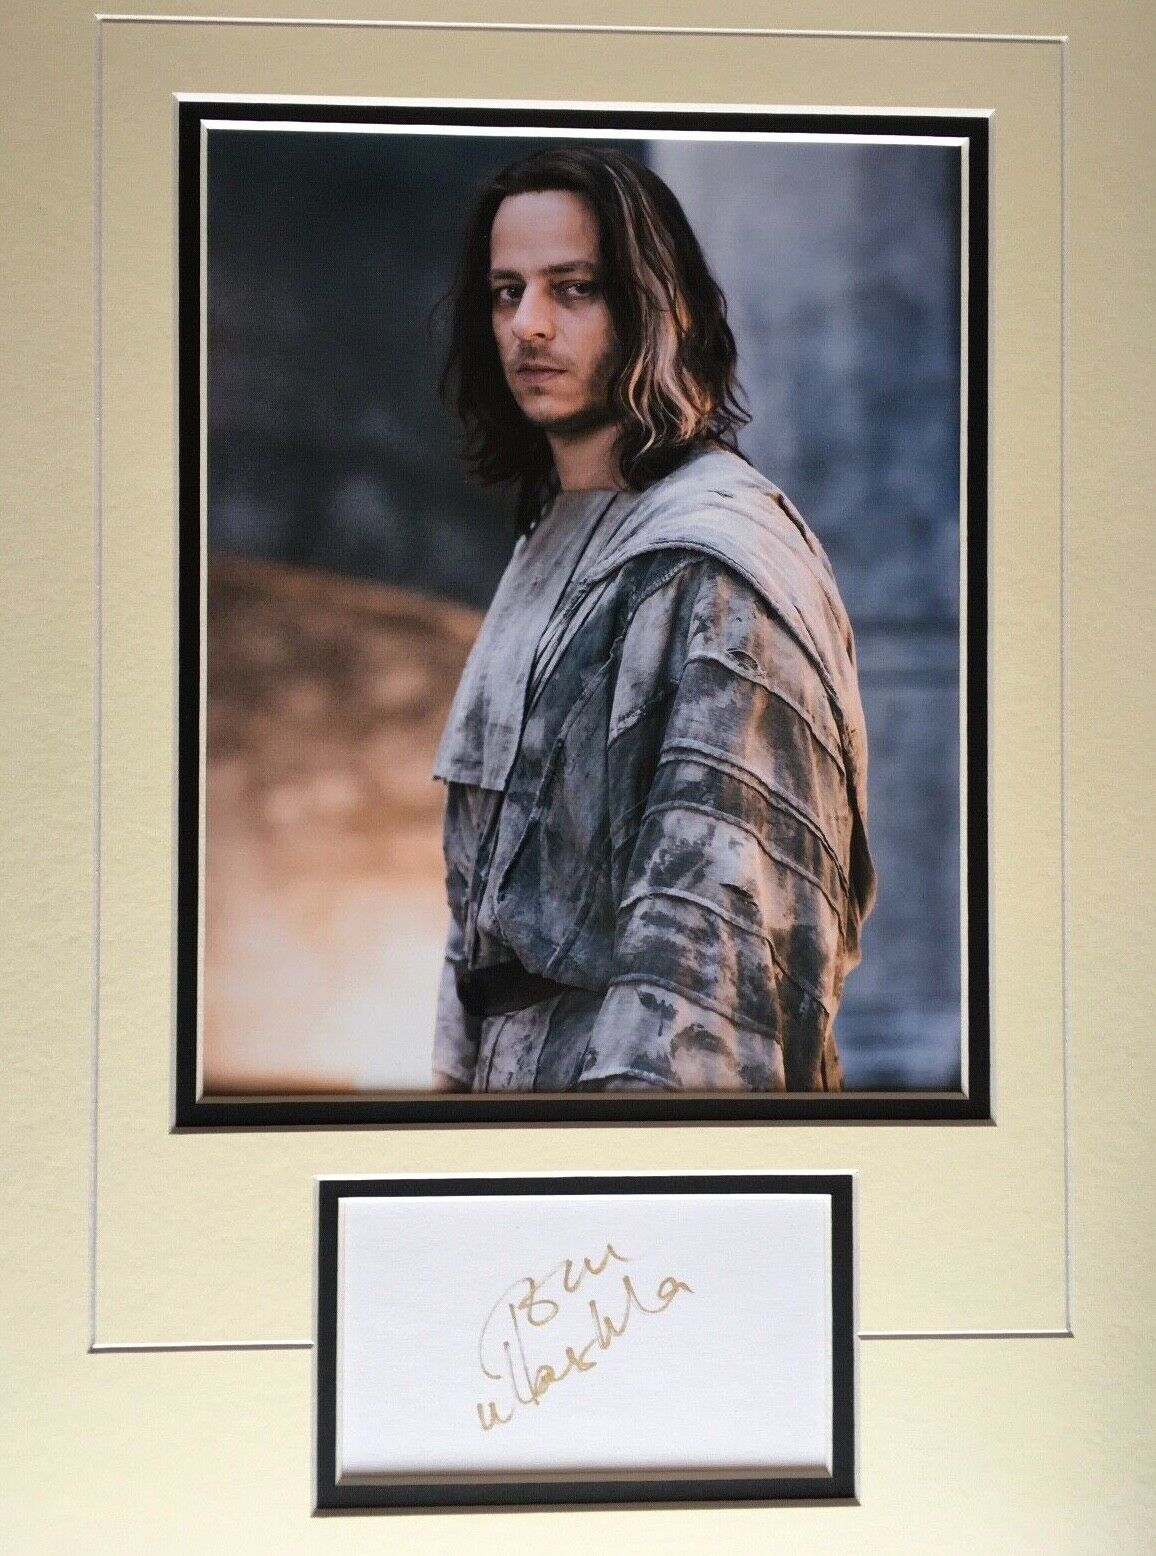 TOM WLASCHIHA - GAME OF THRONES ACTOR - STUNNING SIGNED Photo Poster painting DISPLAY